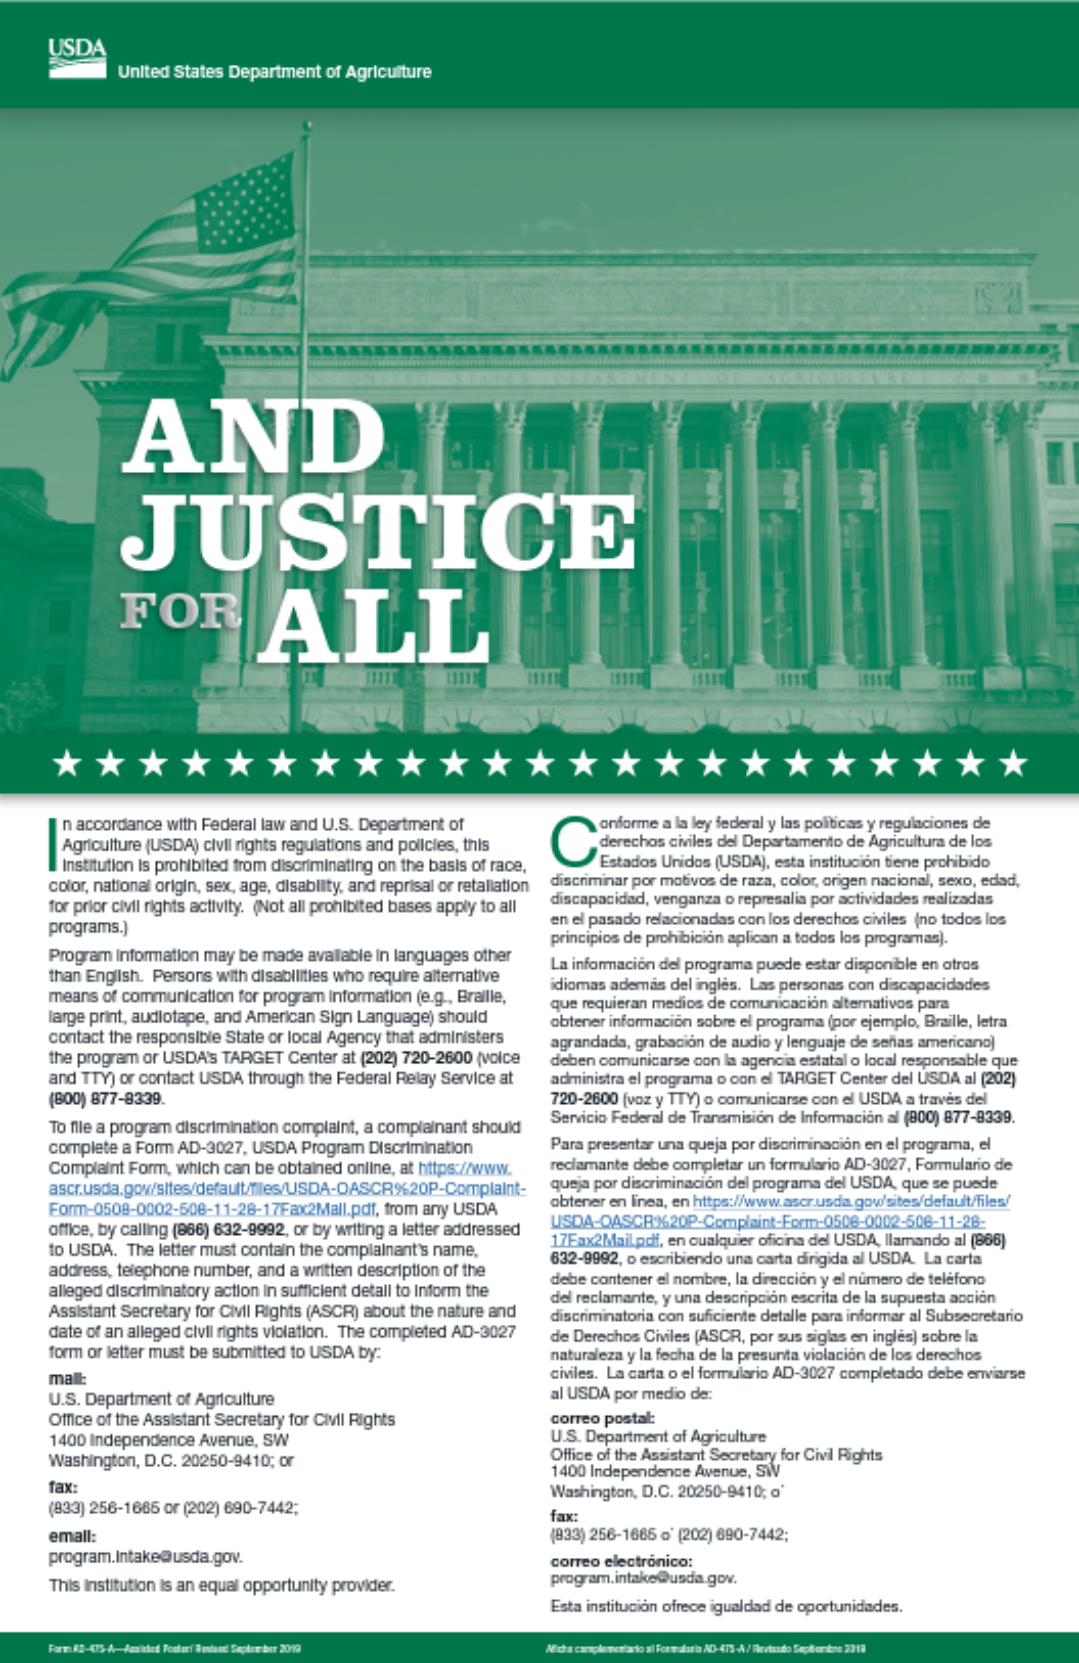 Justice for All Poster